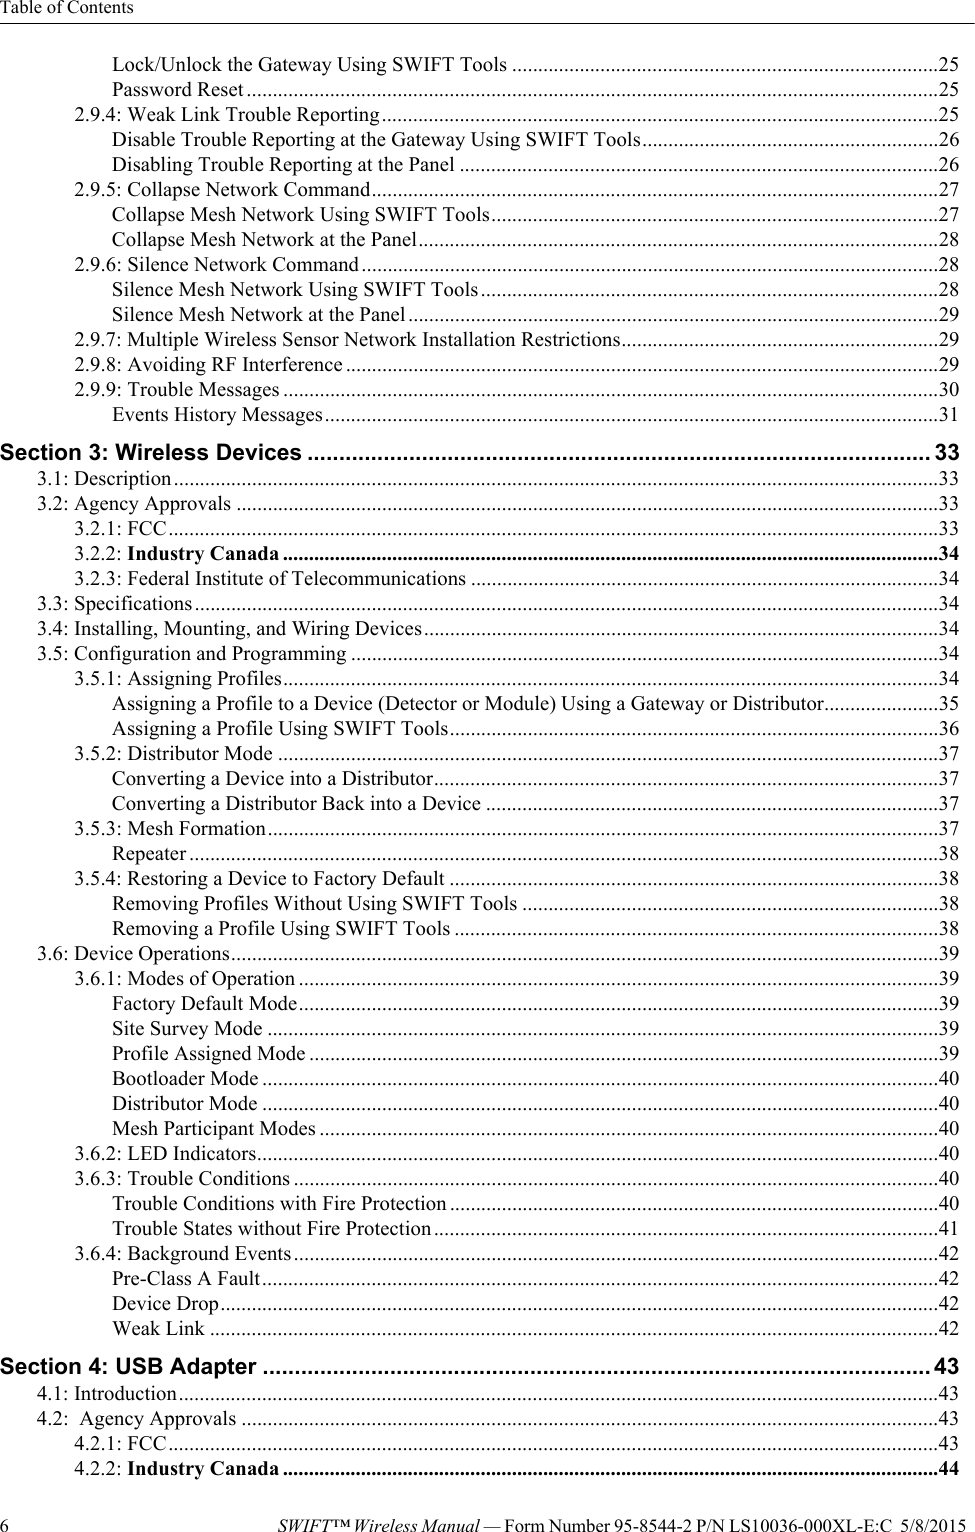 Table of Contents6SWIFT™ Wireless Manual — Form Number 95-8544-2 P/N LS10036-000XL-E:C  5/8/2015  Lock/Unlock the Gateway Using SWIFT Tools ..................................................................................25Password Reset .....................................................................................................................................252.9.4: Weak Link Trouble Reporting...........................................................................................................25Disable Trouble Reporting at the Gateway Using SWIFT Tools.........................................................26Disabling Trouble Reporting at the Panel ............................................................................................262.9.5: Collapse Network Command.............................................................................................................27Collapse Mesh Network Using SWIFT Tools......................................................................................27Collapse Mesh Network at the Panel....................................................................................................282.9.6: Silence Network Command...............................................................................................................28Silence Mesh Network Using SWIFT Tools........................................................................................28Silence Mesh Network at the Panel......................................................................................................292.9.7: Multiple Wireless Sensor Network Installation Restrictions.............................................................292.9.8: Avoiding RF Interference ..................................................................................................................292.9.9: Trouble Messages ..............................................................................................................................30Events History Messages......................................................................................................................31Section 3: Wireless Devices .................................................................................................. 333.1: Description...................................................................................................................................................333.2: Agency Approvals .......................................................................................................................................333.2.1: FCC....................................................................................................................................................333.2.2: Industry Canada ..............................................................................................................................343.2.3: Federal Institute of Telecommunications ..........................................................................................343.3: Specifications...............................................................................................................................................343.4: Installing, Mounting, and Wiring Devices...................................................................................................343.5: Configuration and Programming .................................................................................................................343.5.1: Assigning Profiles..............................................................................................................................34Assigning a Profile to a Device (Detector or Module) Using a Gateway or Distributor......................35Assigning a Profile Using SWIFT Tools..............................................................................................363.5.2: Distributor Mode ...............................................................................................................................37Converting a Device into a Distributor.................................................................................................37Converting a Distributor Back into a Device .......................................................................................373.5.3: Mesh Formation.................................................................................................................................37Repeater ................................................................................................................................................383.5.4: Restoring a Device to Factory Default ..............................................................................................38Removing Profiles Without Using SWIFT Tools ................................................................................38Removing a Profile Using SWIFT Tools .............................................................................................383.6: Device Operations........................................................................................................................................393.6.1: Modes of Operation ...........................................................................................................................39Factory Default Mode...........................................................................................................................39Site Survey Mode .................................................................................................................................39Profile Assigned Mode .........................................................................................................................39Bootloader Mode ..................................................................................................................................40Distributor Mode ..................................................................................................................................40Mesh Participant Modes .......................................................................................................................403.6.2: LED Indicators...................................................................................................................................403.6.3: Trouble Conditions ............................................................................................................................40Trouble Conditions with Fire Protection ..............................................................................................40Trouble States without Fire Protection .................................................................................................413.6.4: Background Events............................................................................................................................42Pre-Class A Fault..................................................................................................................................42Device Drop..........................................................................................................................................42Weak Link ............................................................................................................................................42Section 4: USB Adapter ......................................................................................................... 434.1: Introduction..................................................................................................................................................434.2:  Agency Approvals ......................................................................................................................................434.2.1: FCC....................................................................................................................................................434.2.2: Industry Canada ..............................................................................................................................44